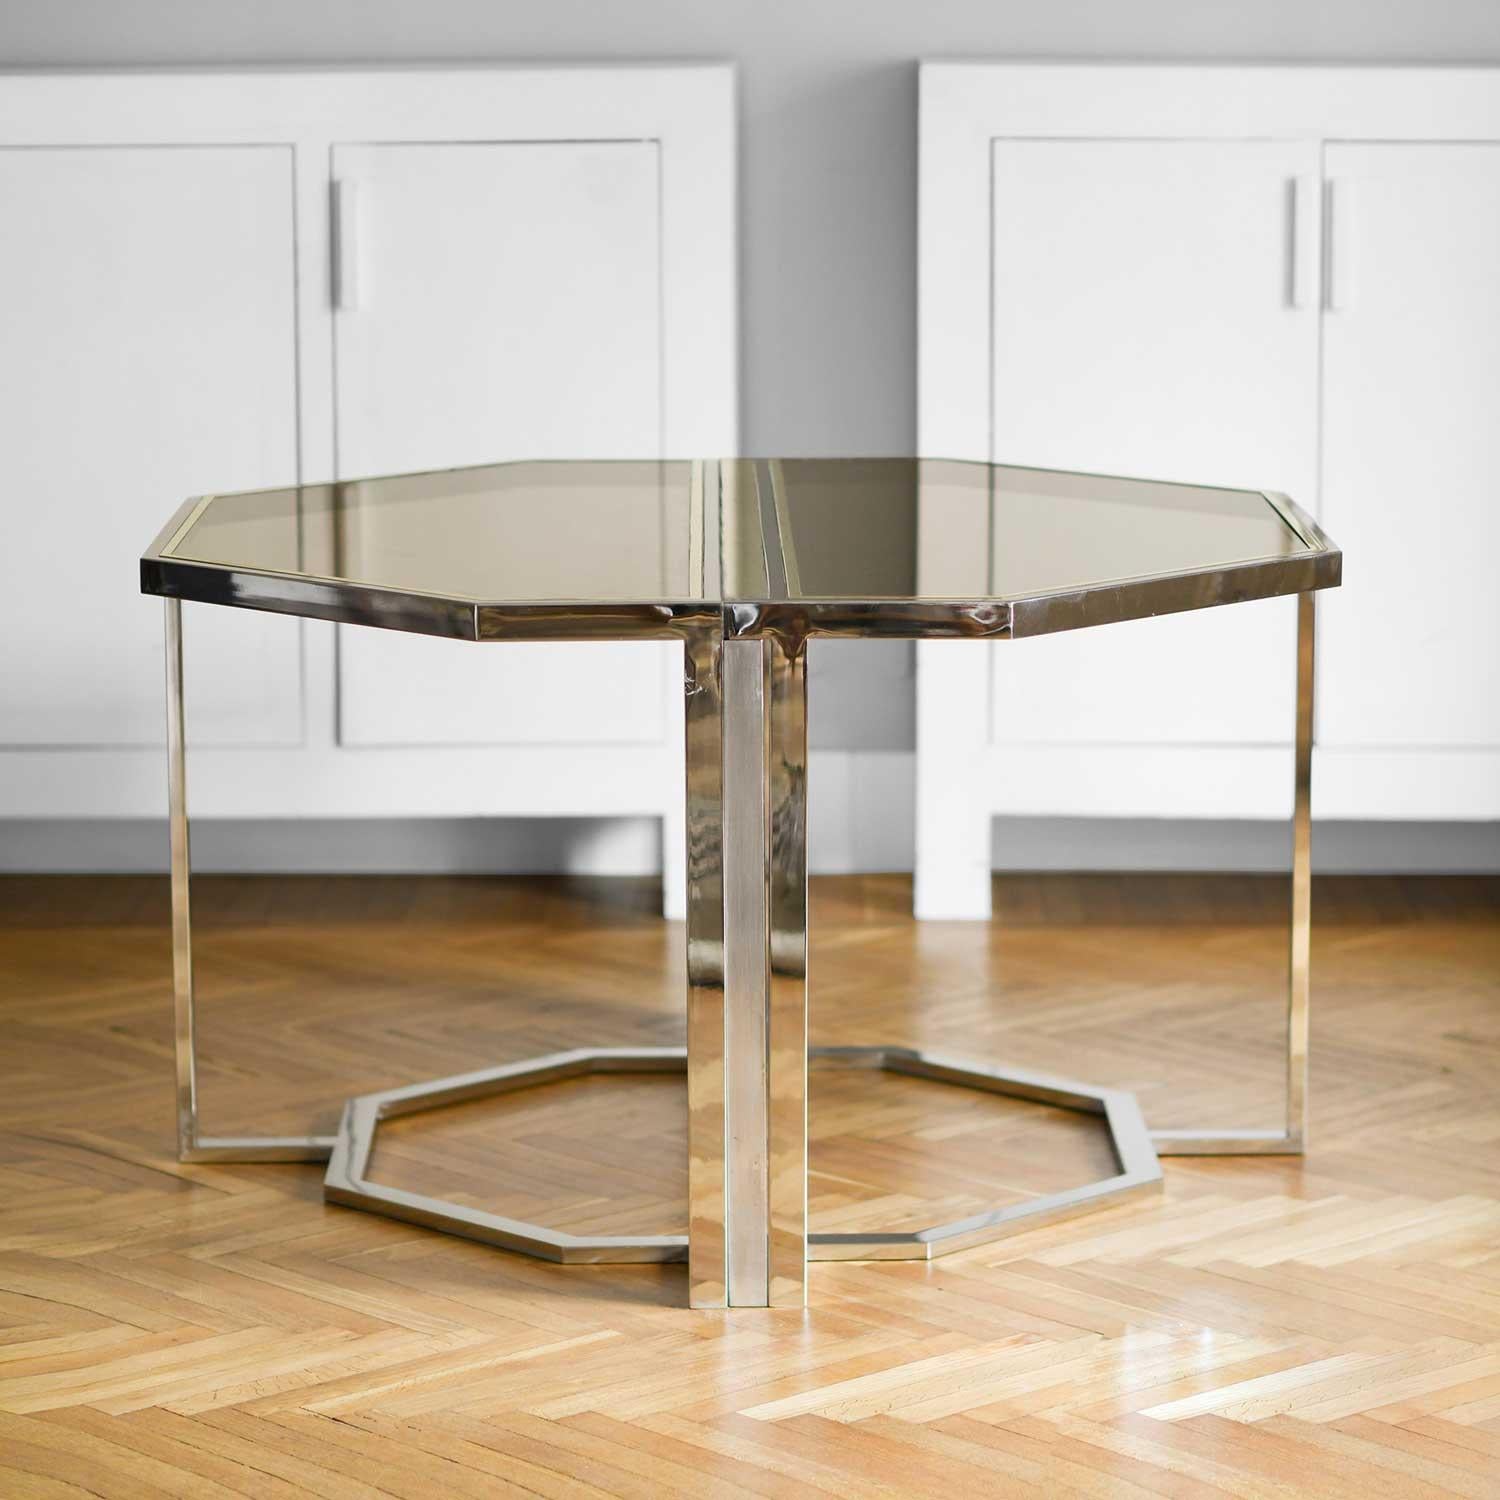 Modular table in chromed metal and brass with smoked glass top, from the 1980s.
Table consisting of two consolles that can be joined together, one of those has an extendable top.
Dimensions of the single consolles: 67 cm (width) x 130 cm (depth) x